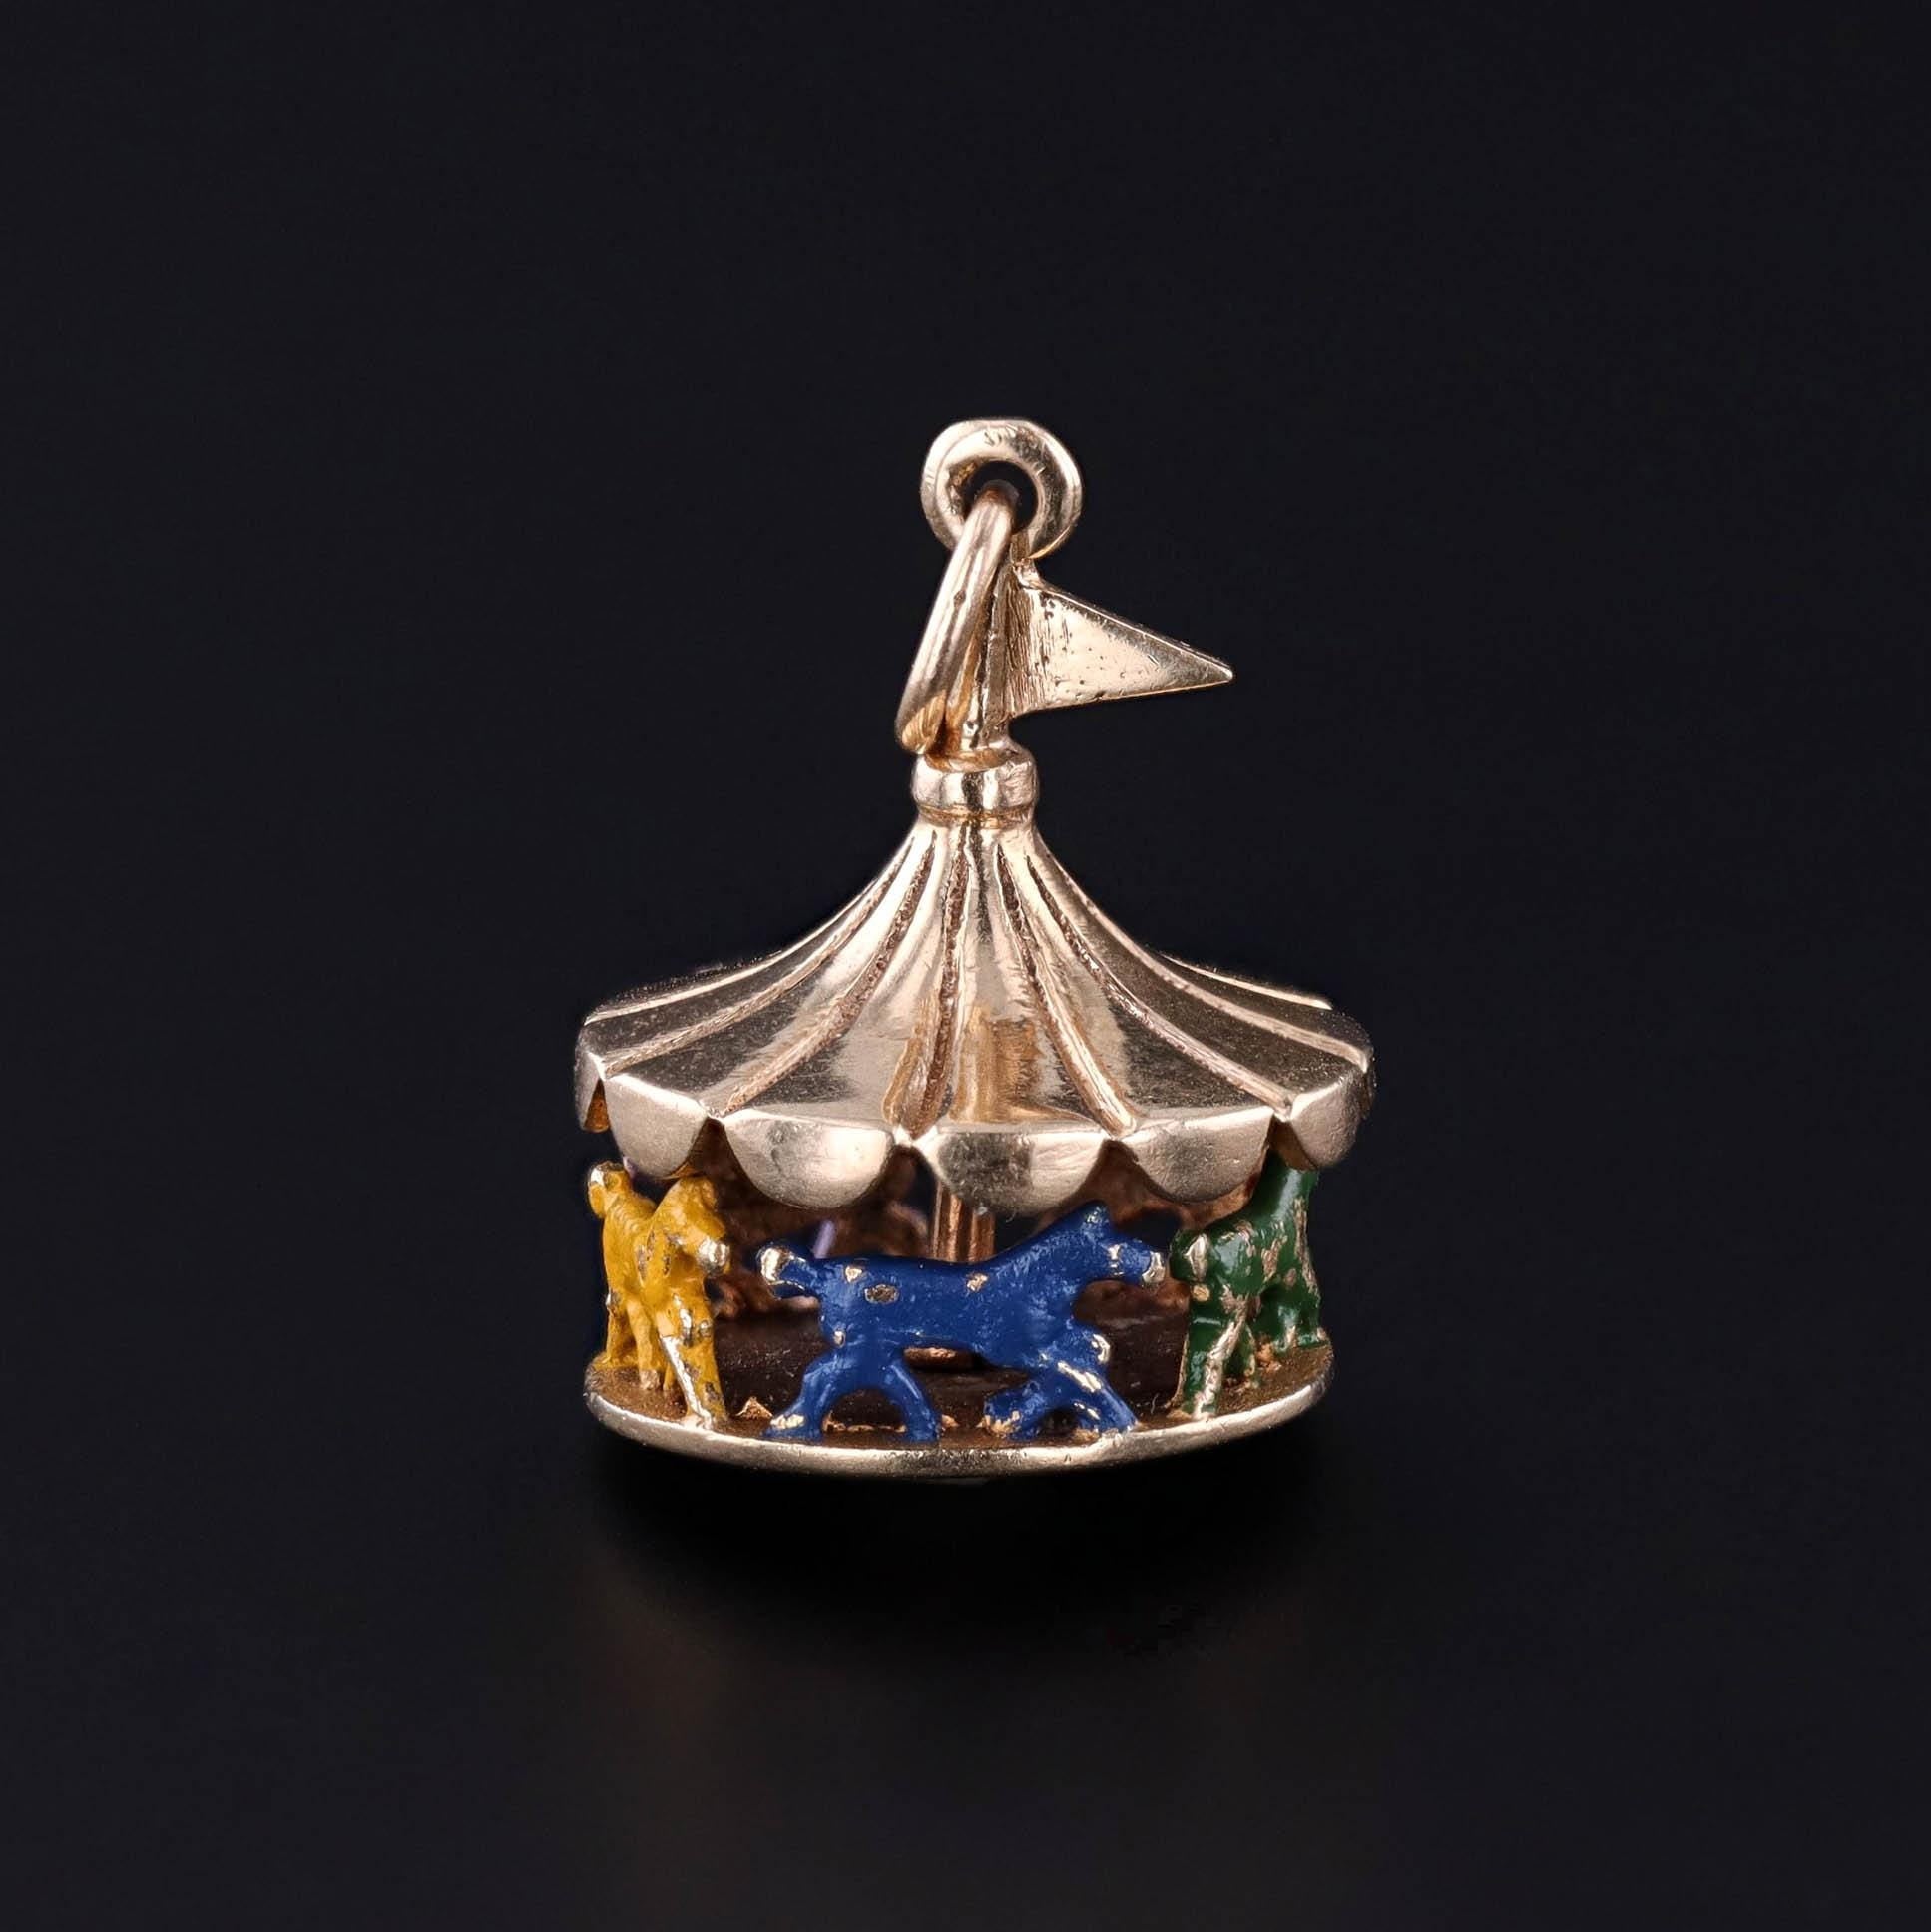 A vintage carousel charmof 14k gold adorned with colorful enamel. The mid-century jewel is in good condition with some wear to the horses. Perfect for any charm collector, amusement park lover, or vintage jewelry lover.